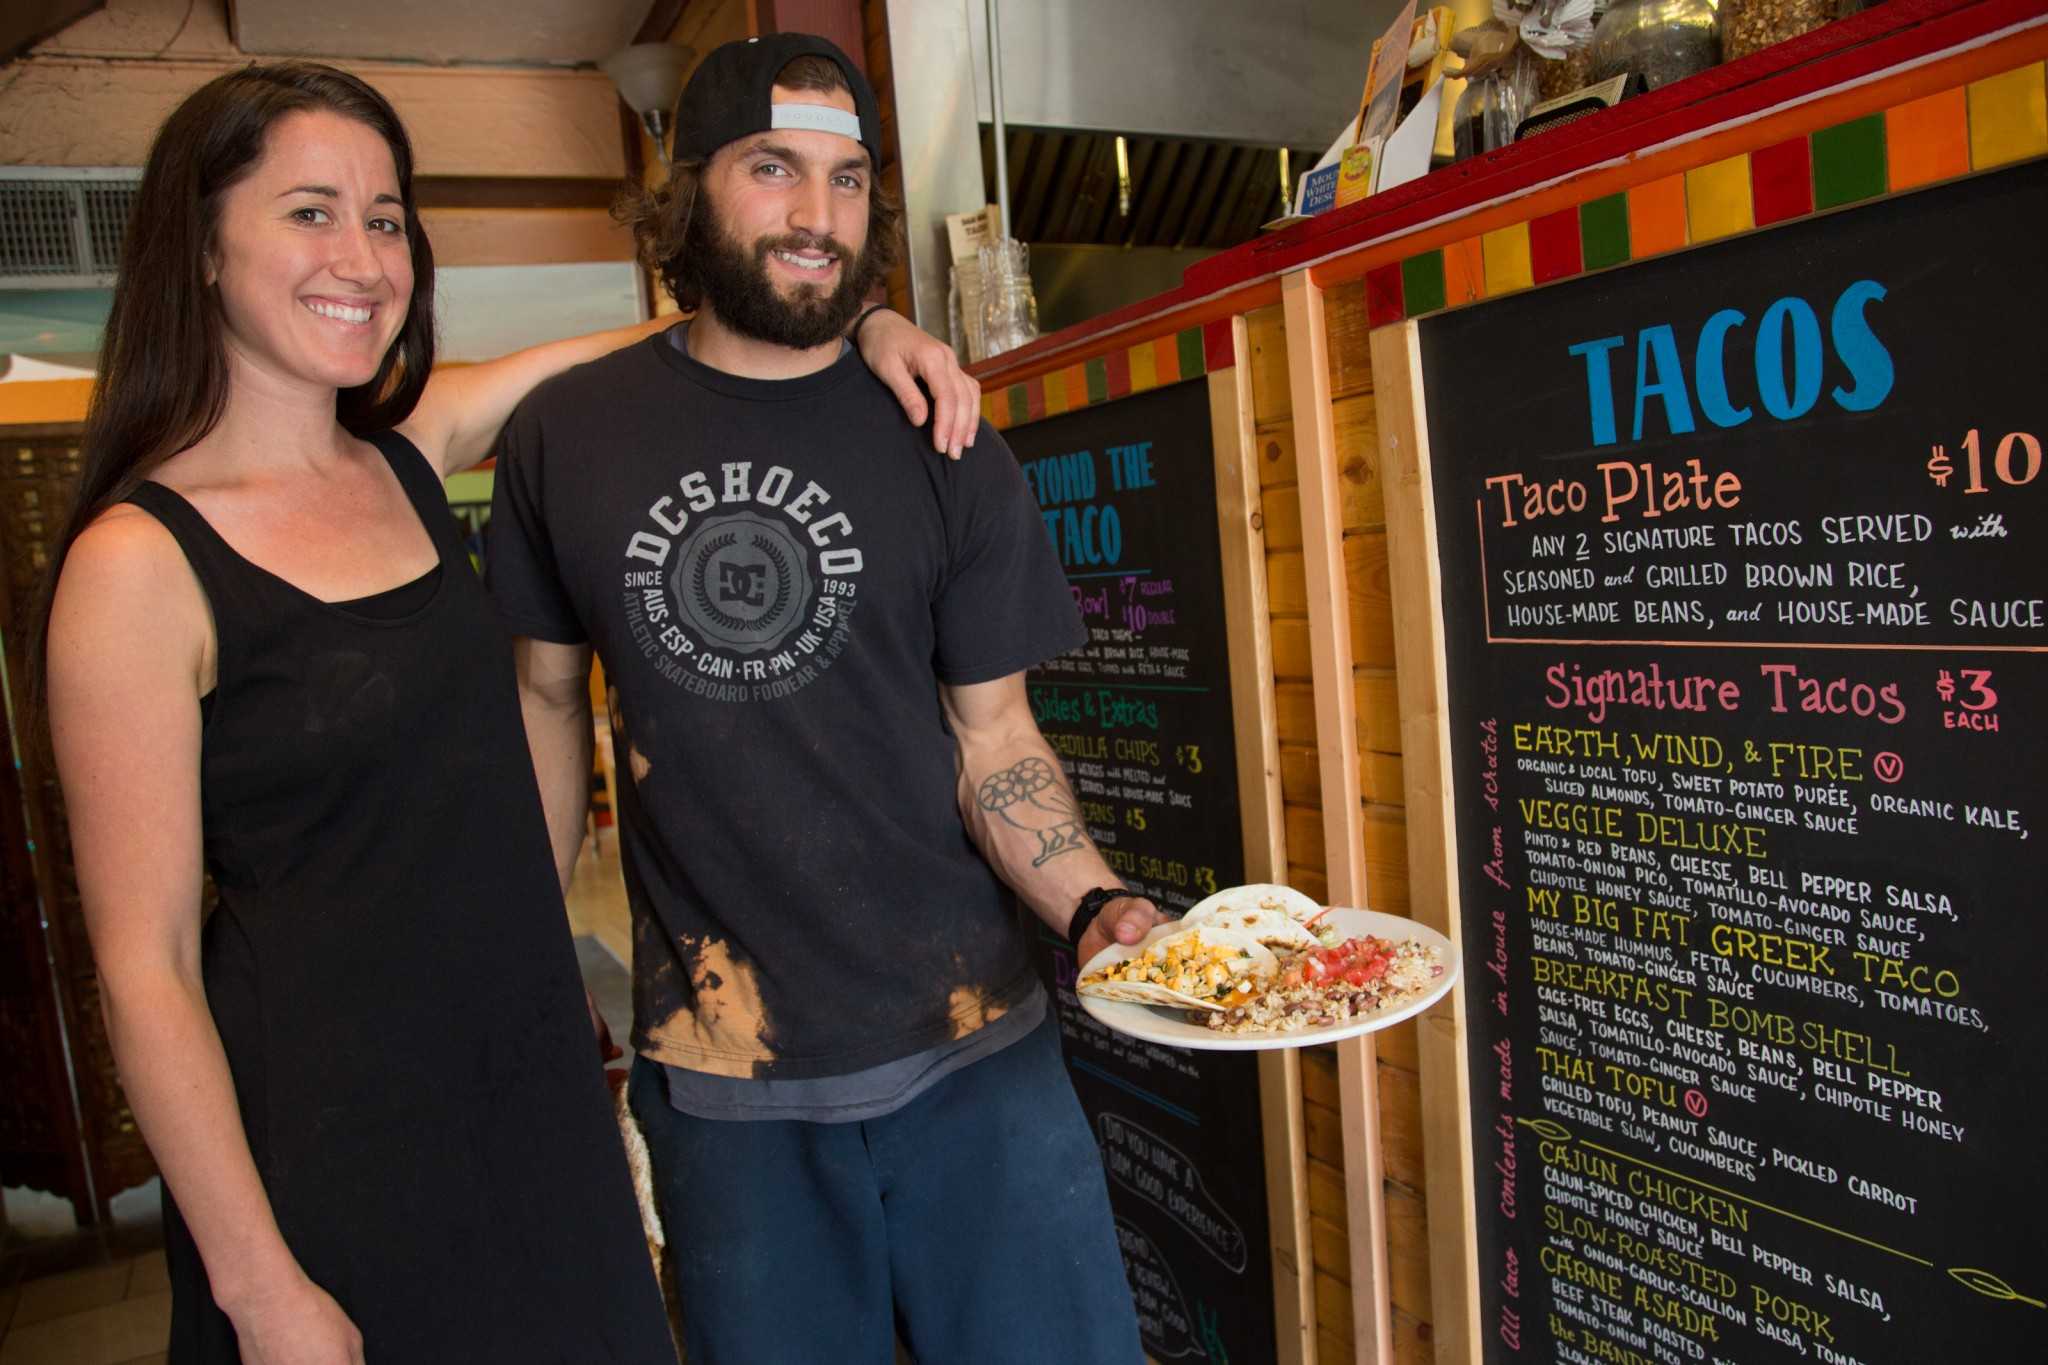 Dam Good Tacos co-owners Ali Hatcher and Michael Falco at their shop in the ally on Laurel St. Ali is a Colorado State University Public Health alum who opened the shop with Michael last June.